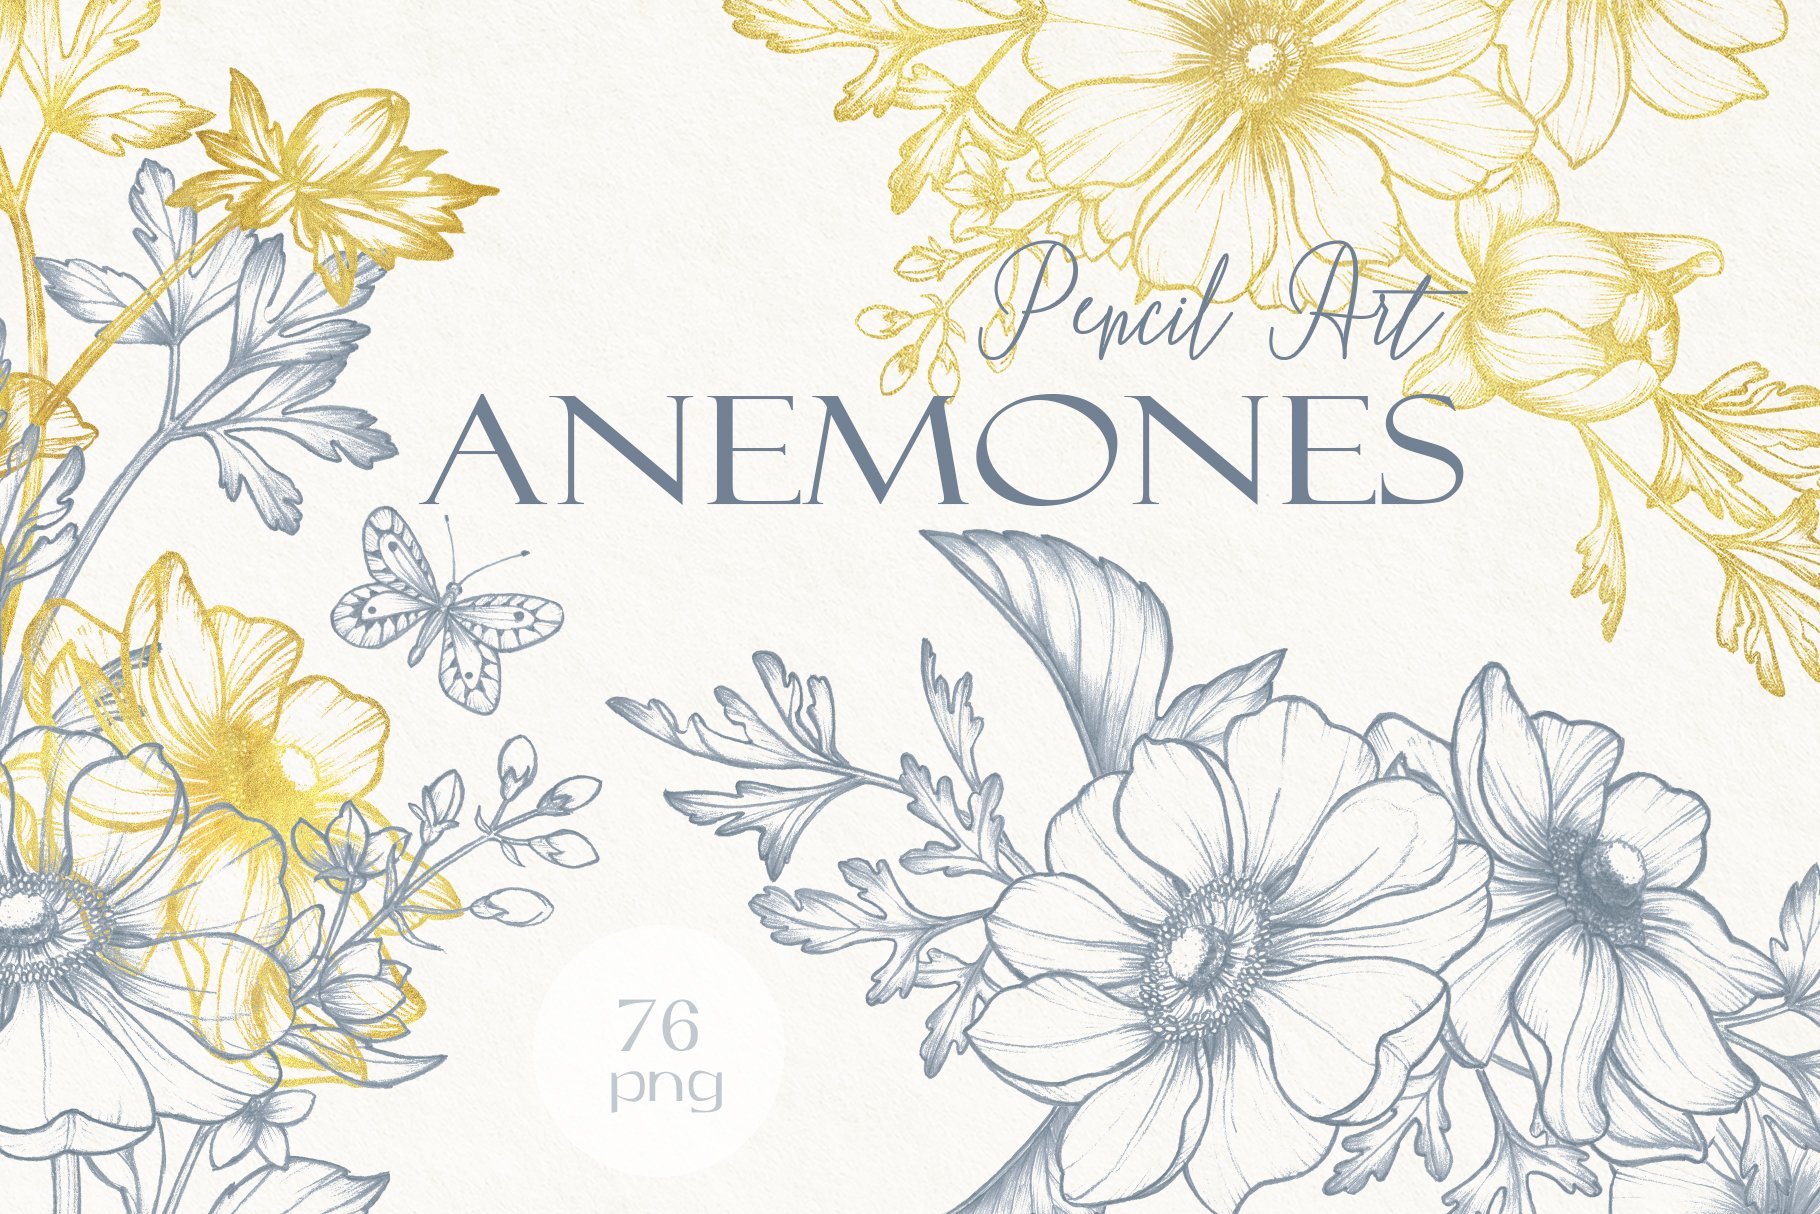 Anemones. Pencil and gold collection cover image.